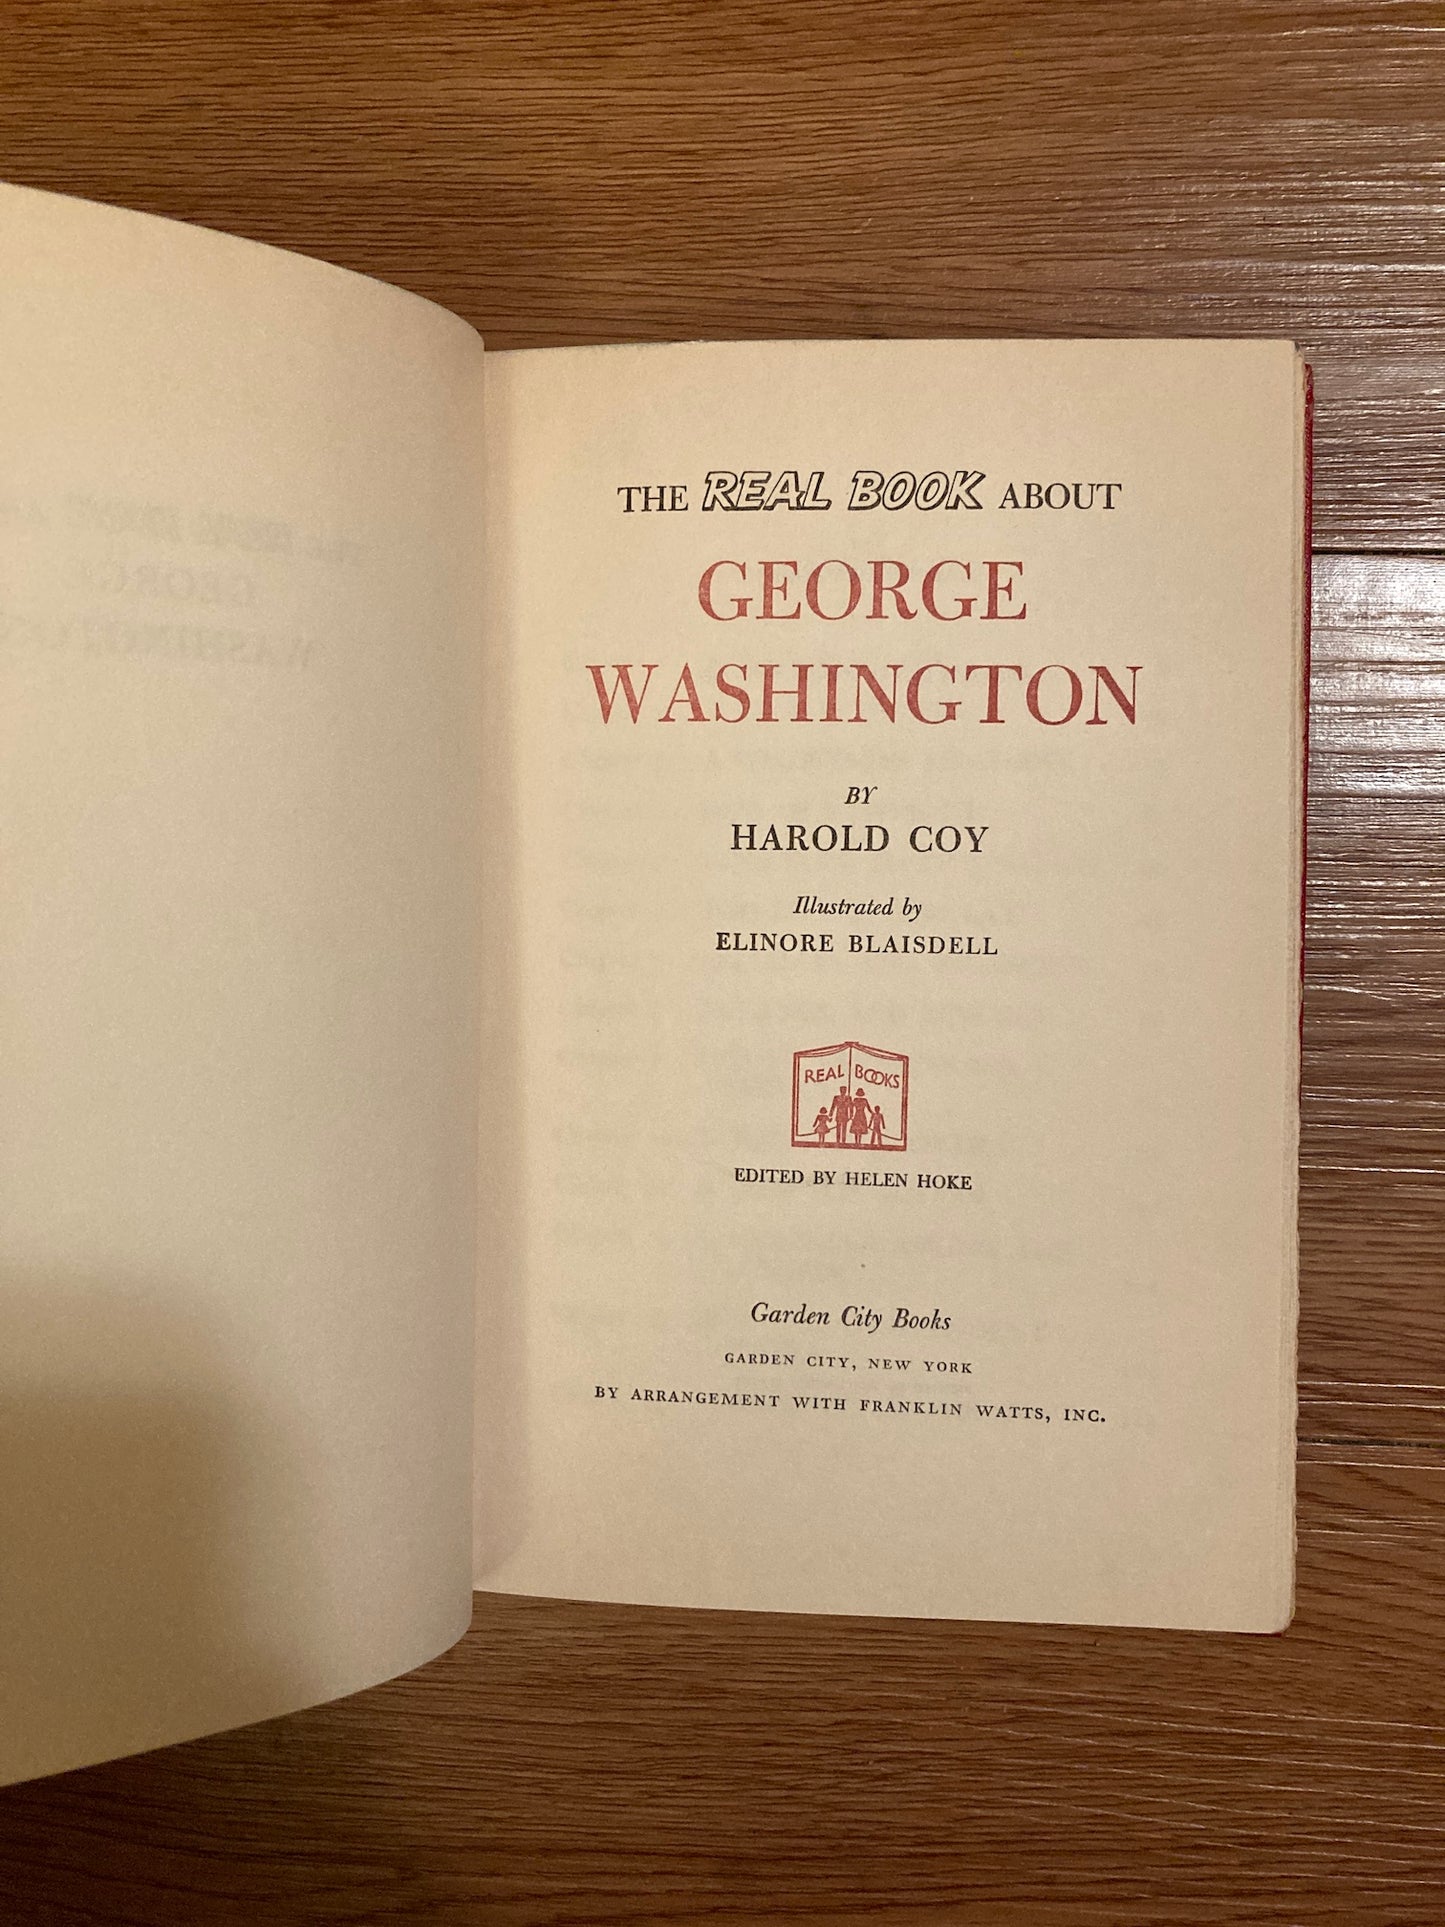 The Real Book about George Washington, 1952, Harold Coy